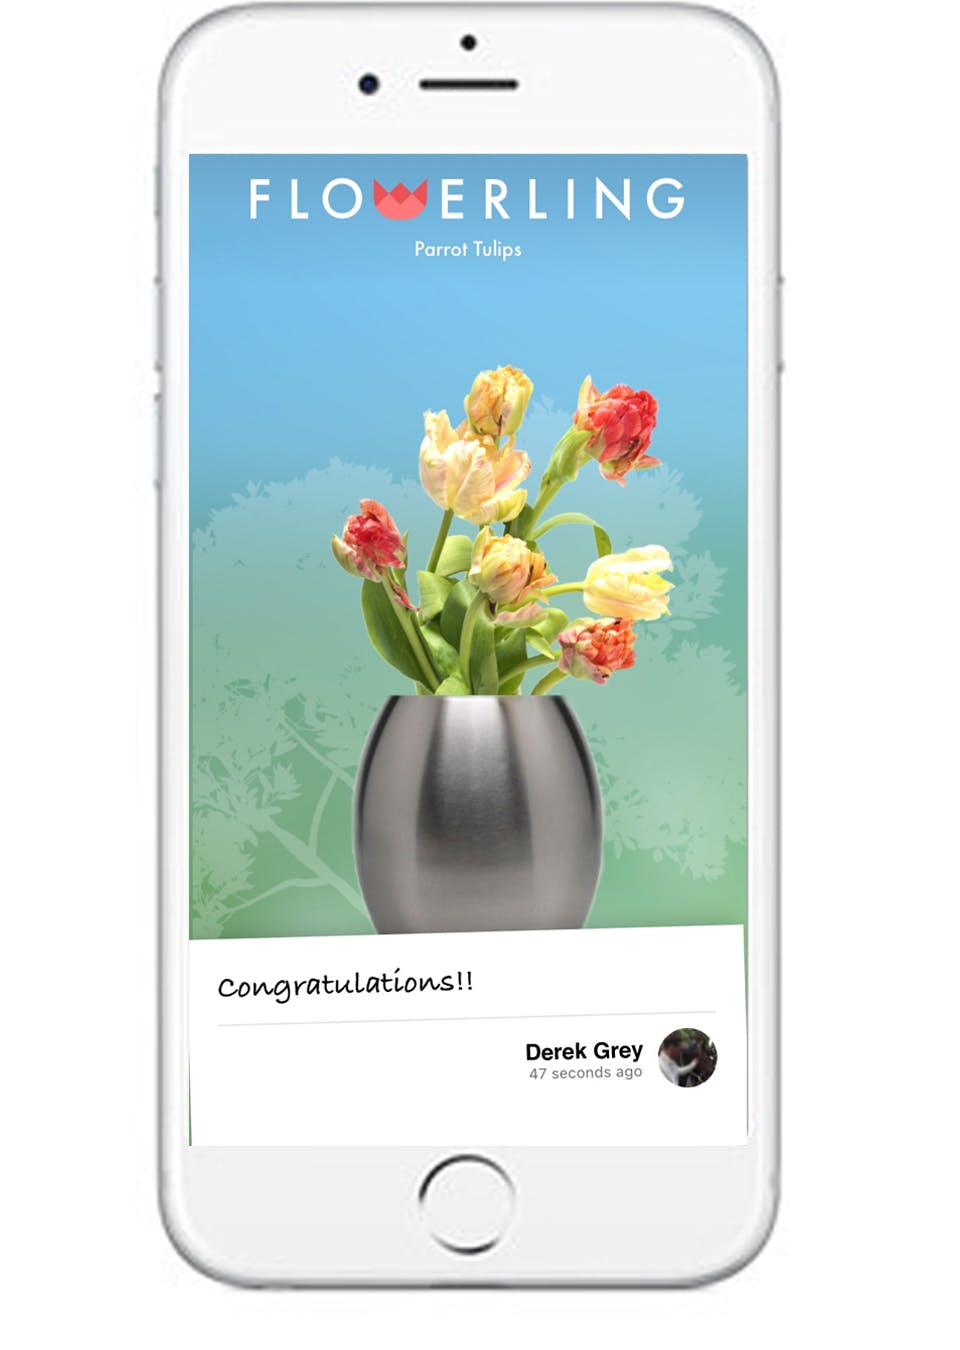 Flowerling - A new way to send flowers | Product Hunt